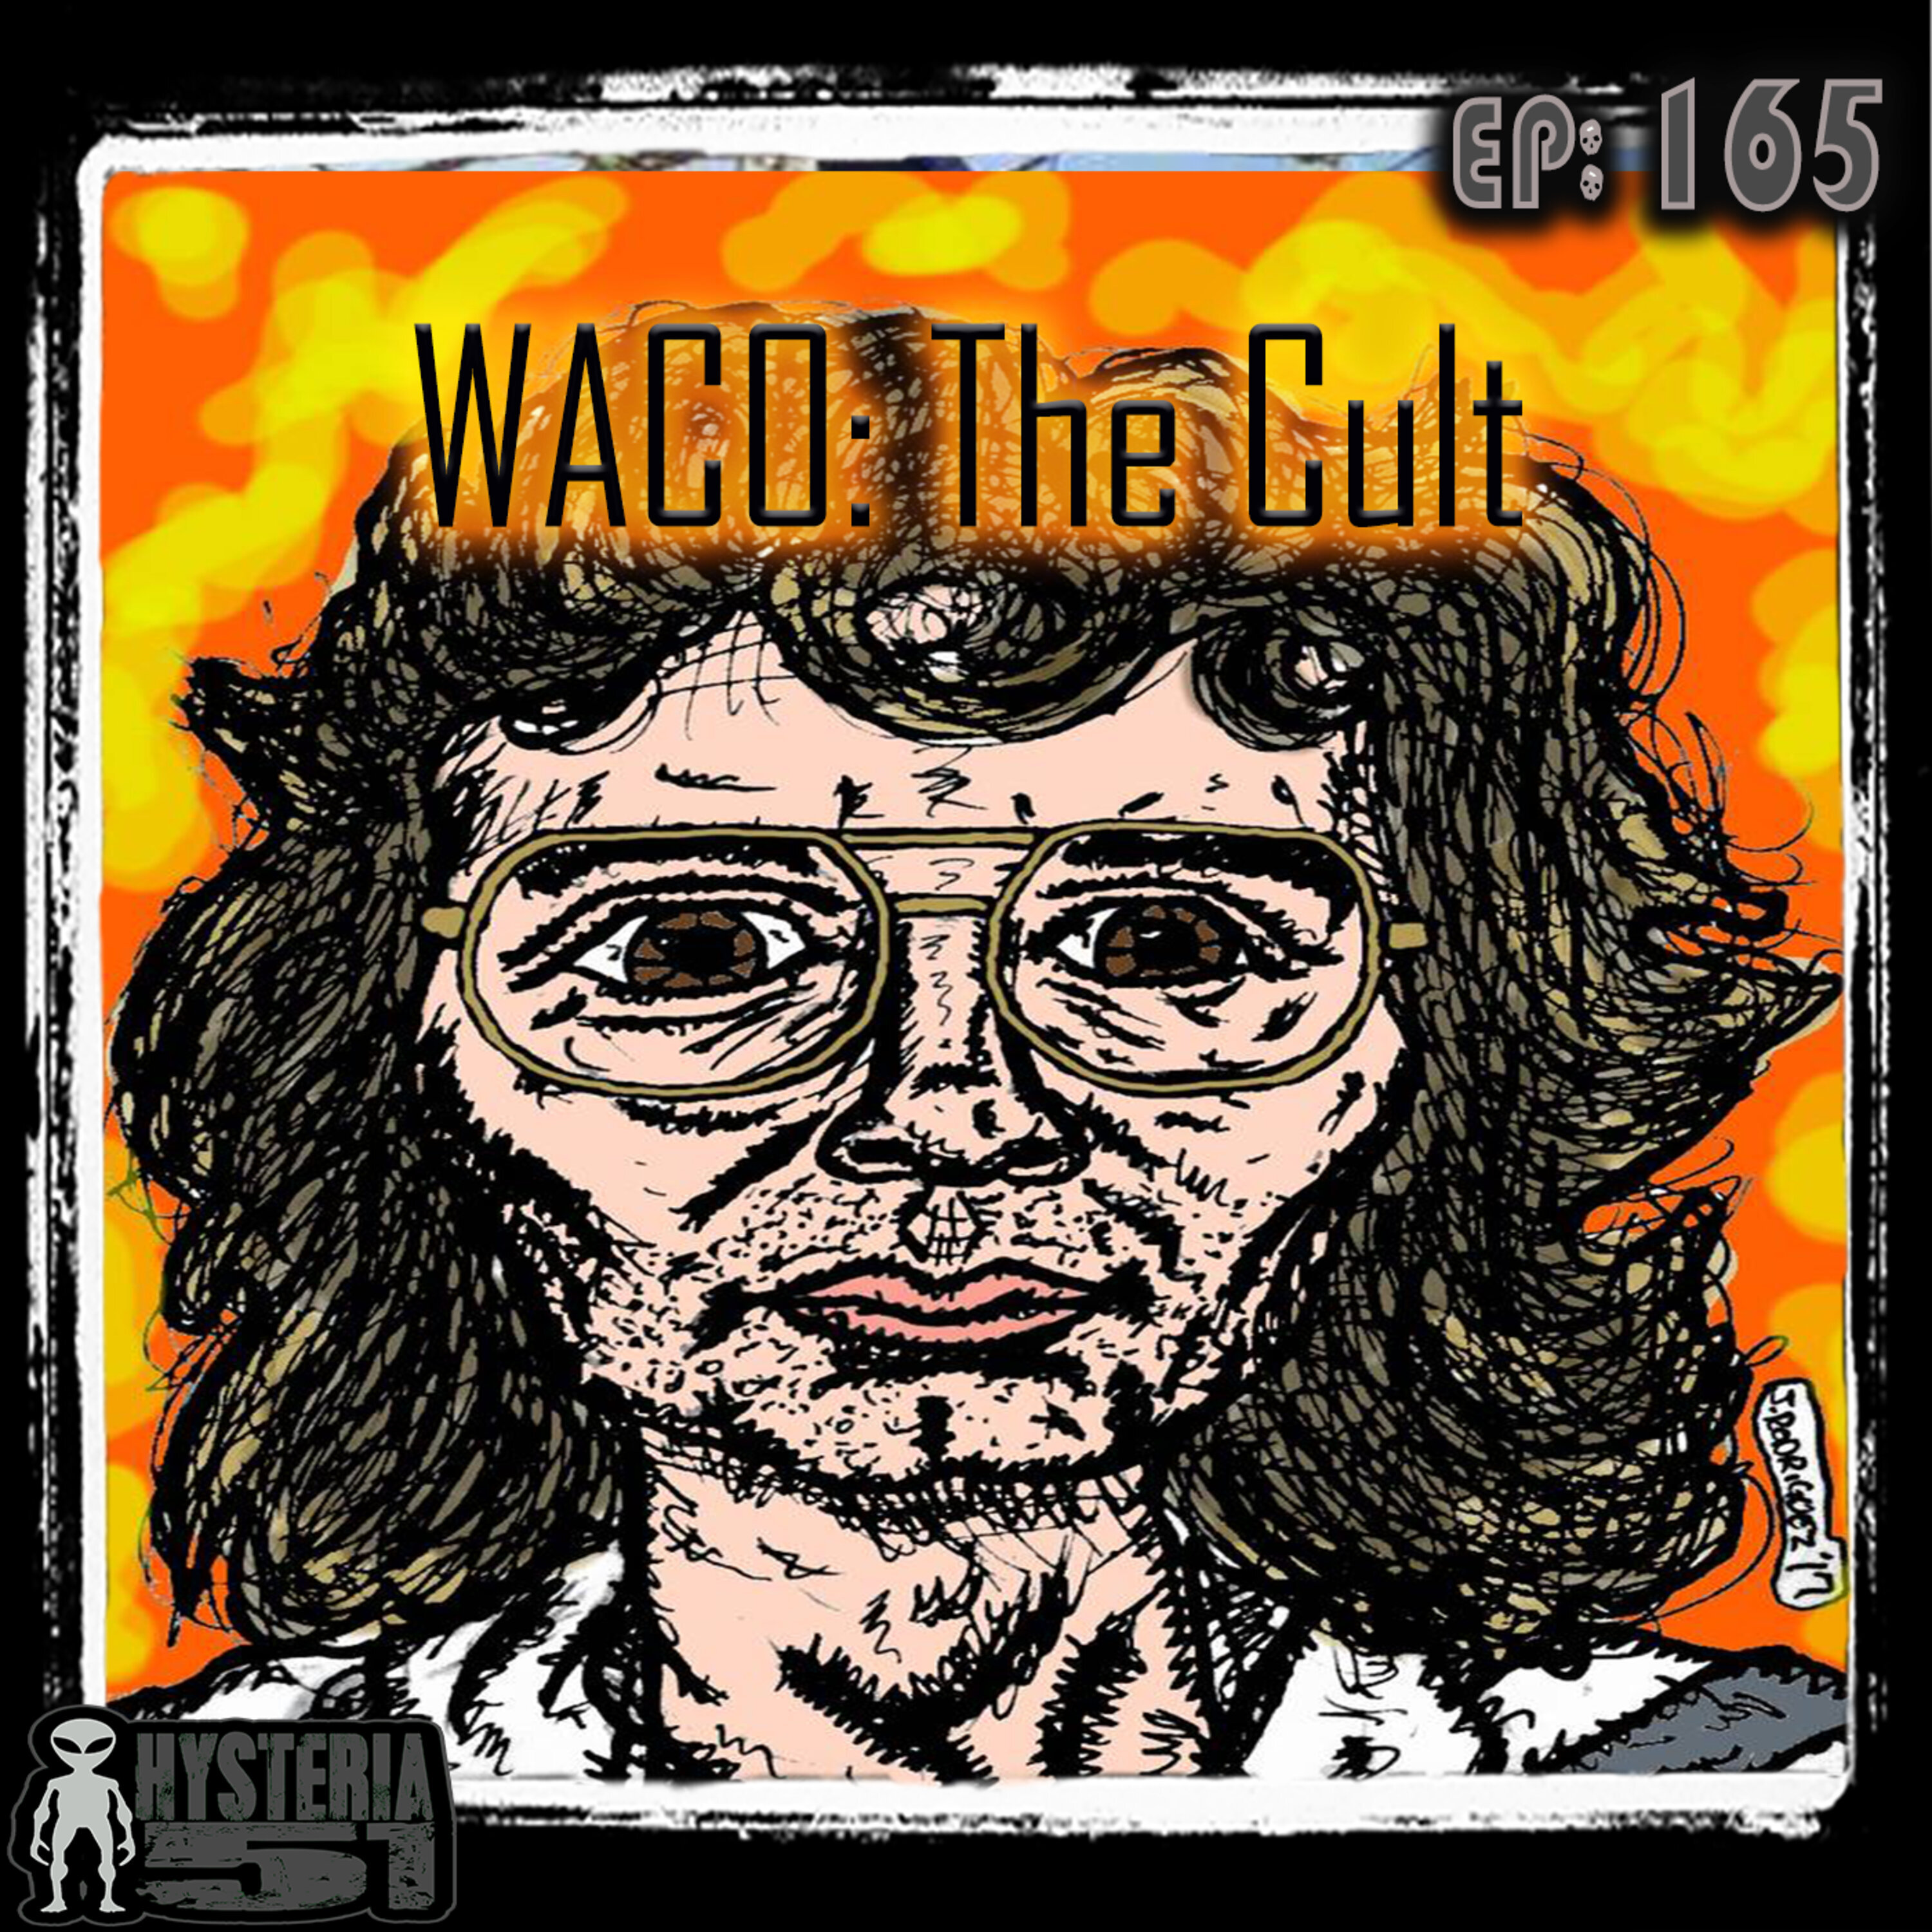 Waco: The Branch Davidian Cult and the Rise of David Koresh | 164 Image